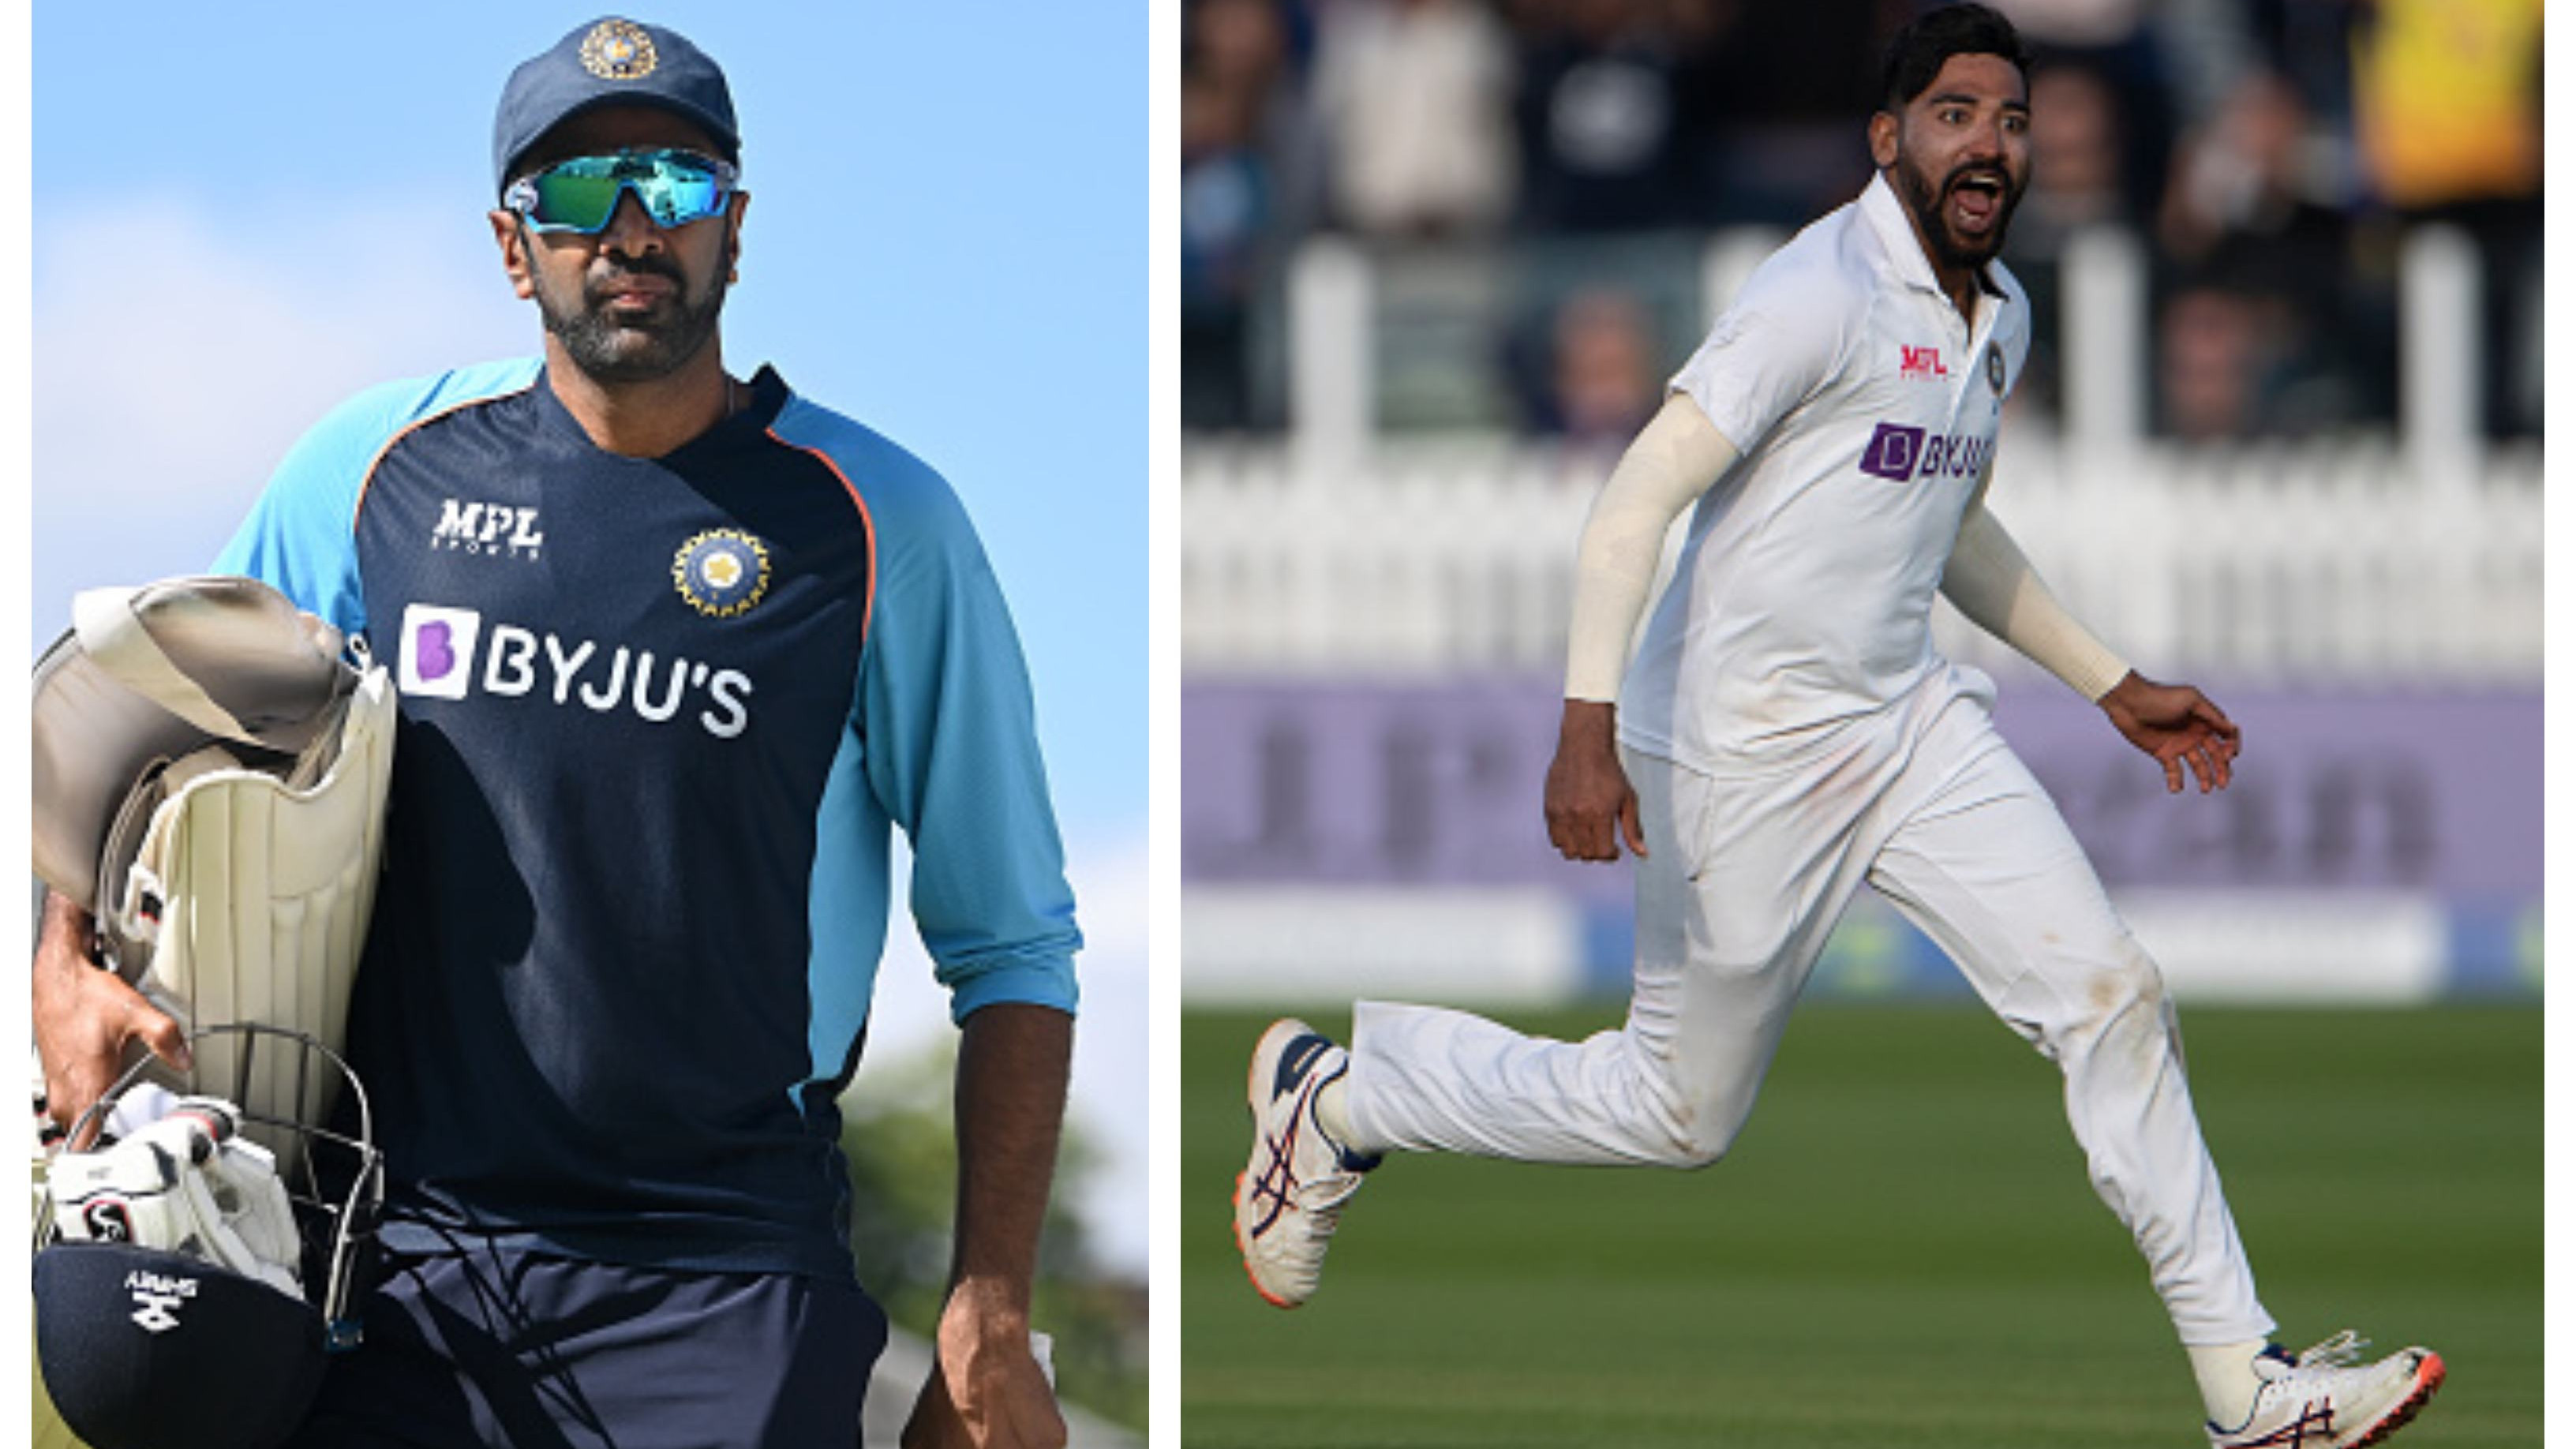 ENG v IND 2021: ‘How is he able to use the slope so effectively?’, wonders Ashwin after Siraj’s brilliance at Lord’s